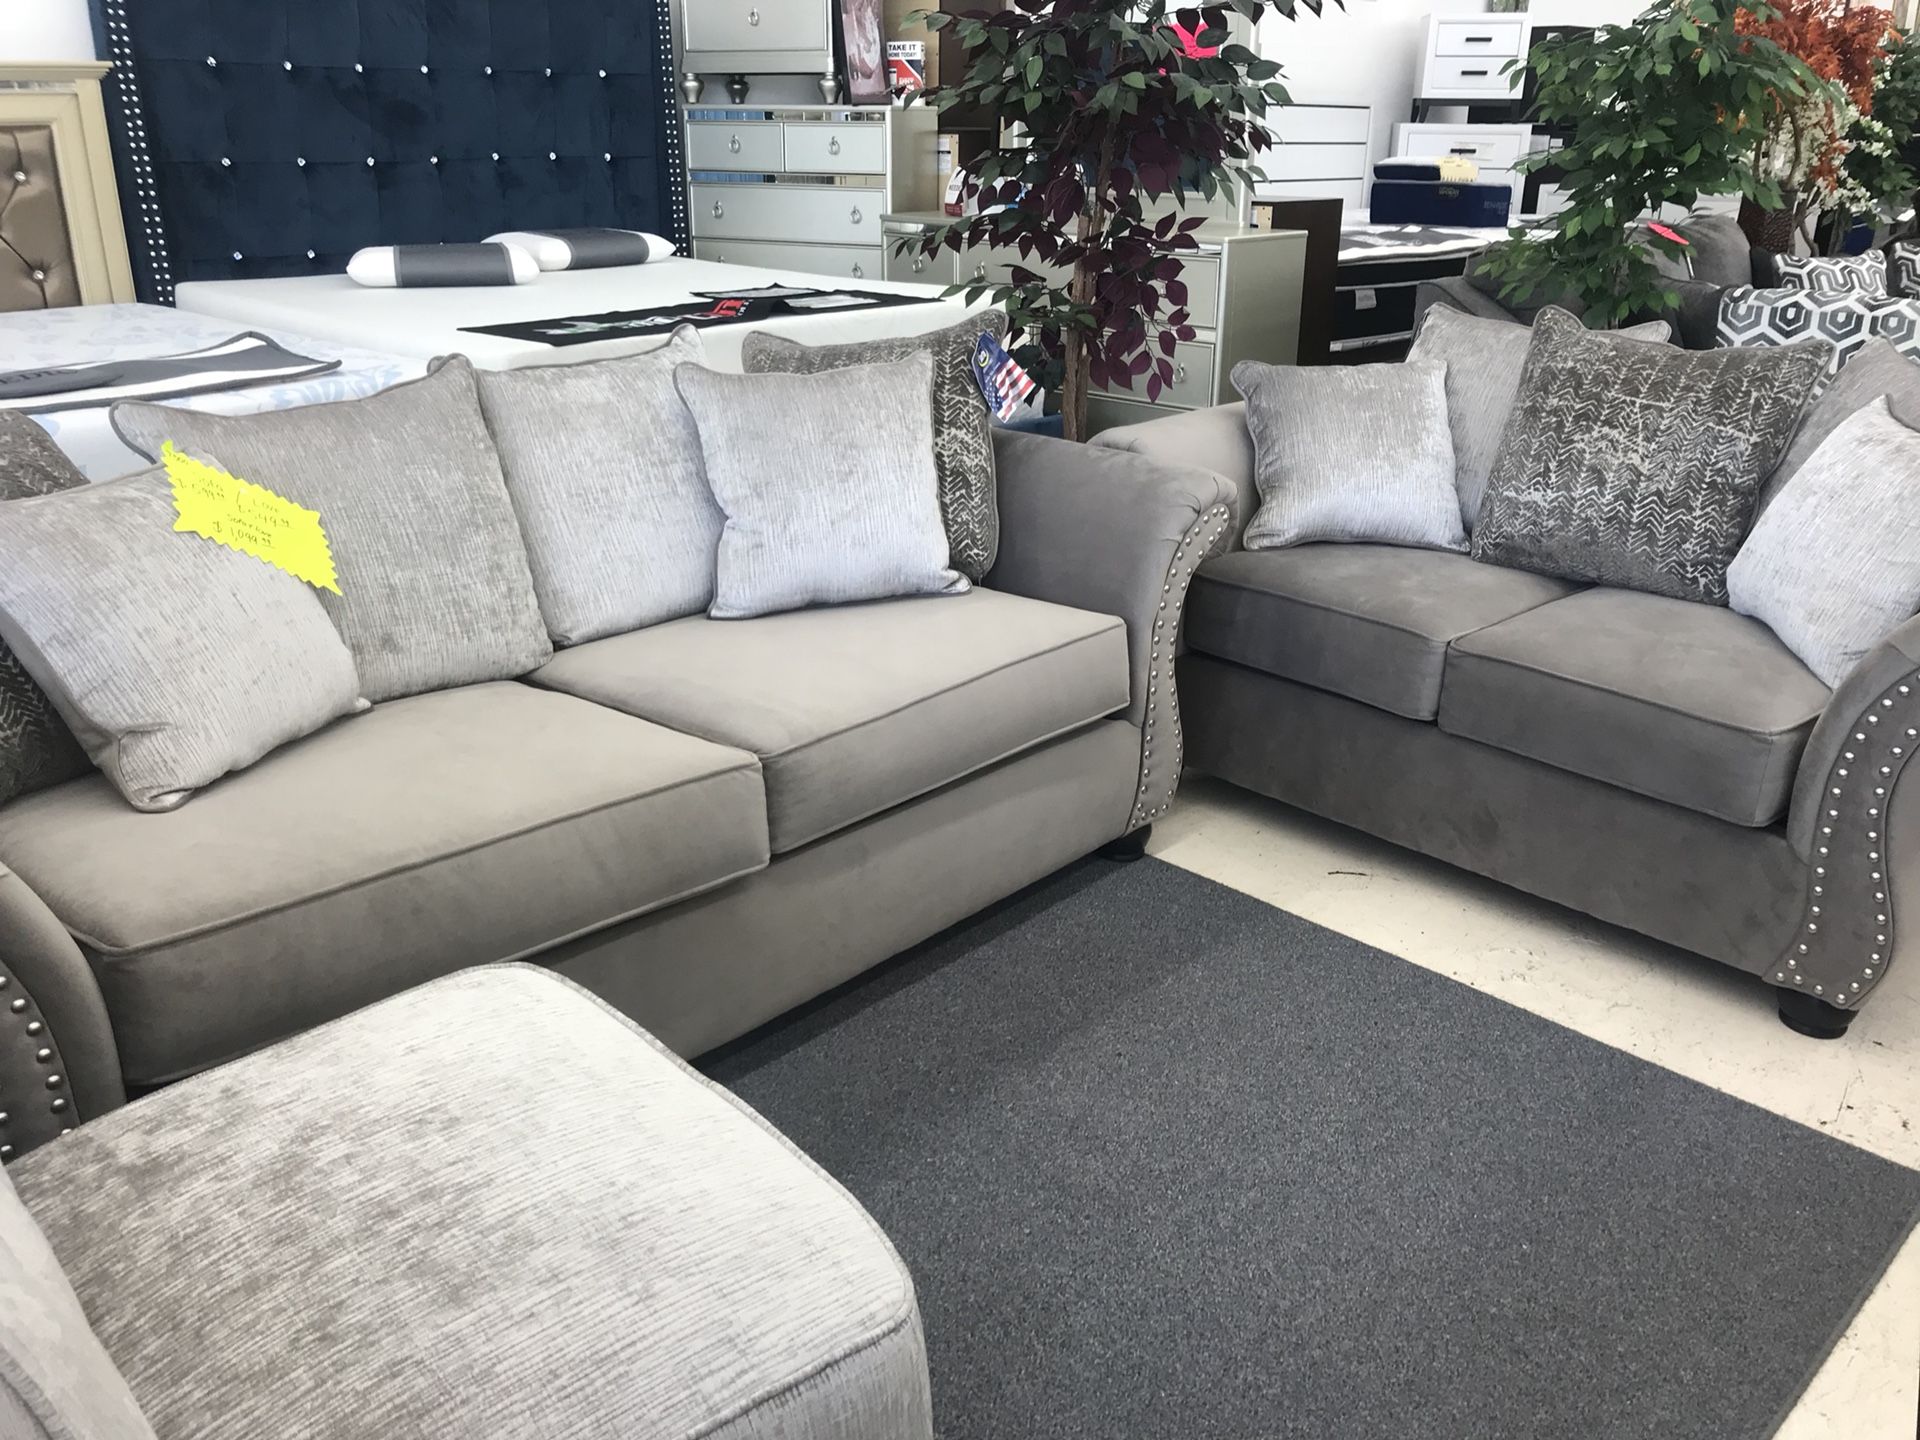 CLEARANCE LIVING ROOM SET SOFA AND LOVESEAT ON SALE